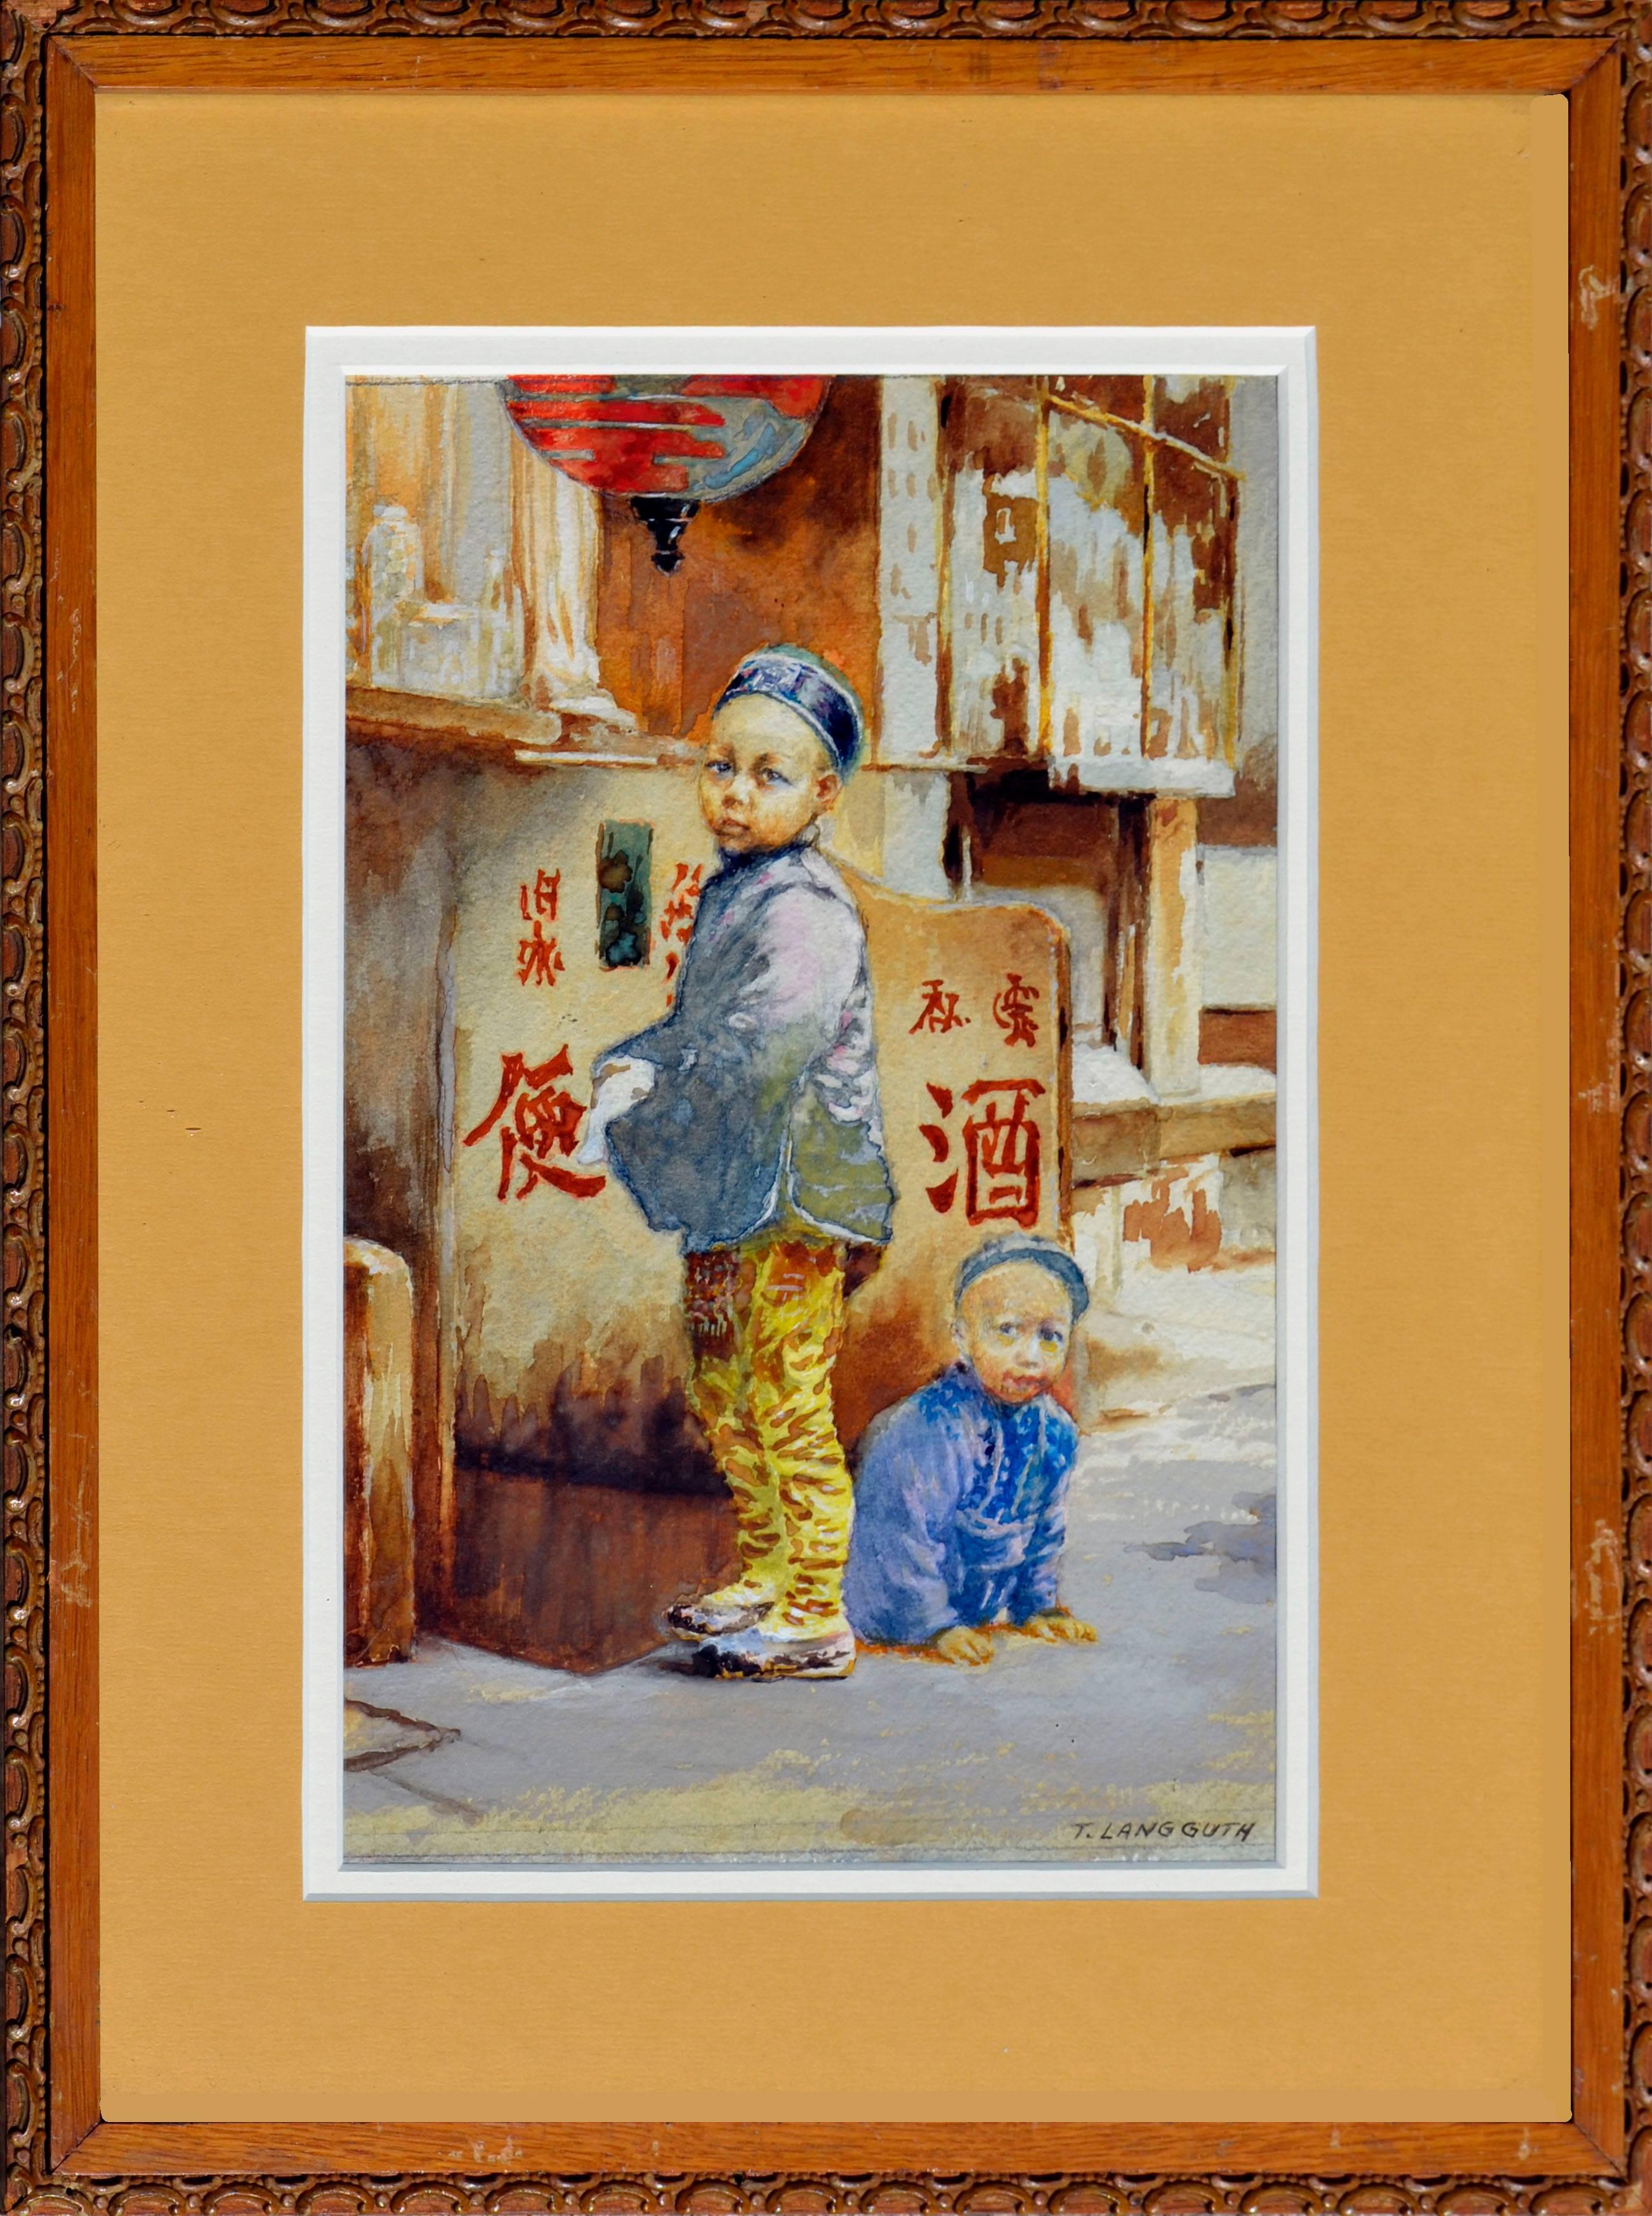 Theodore Ernest Langguth Figurative Art - China Town San Francisco 1896 - Watercolor on Paper